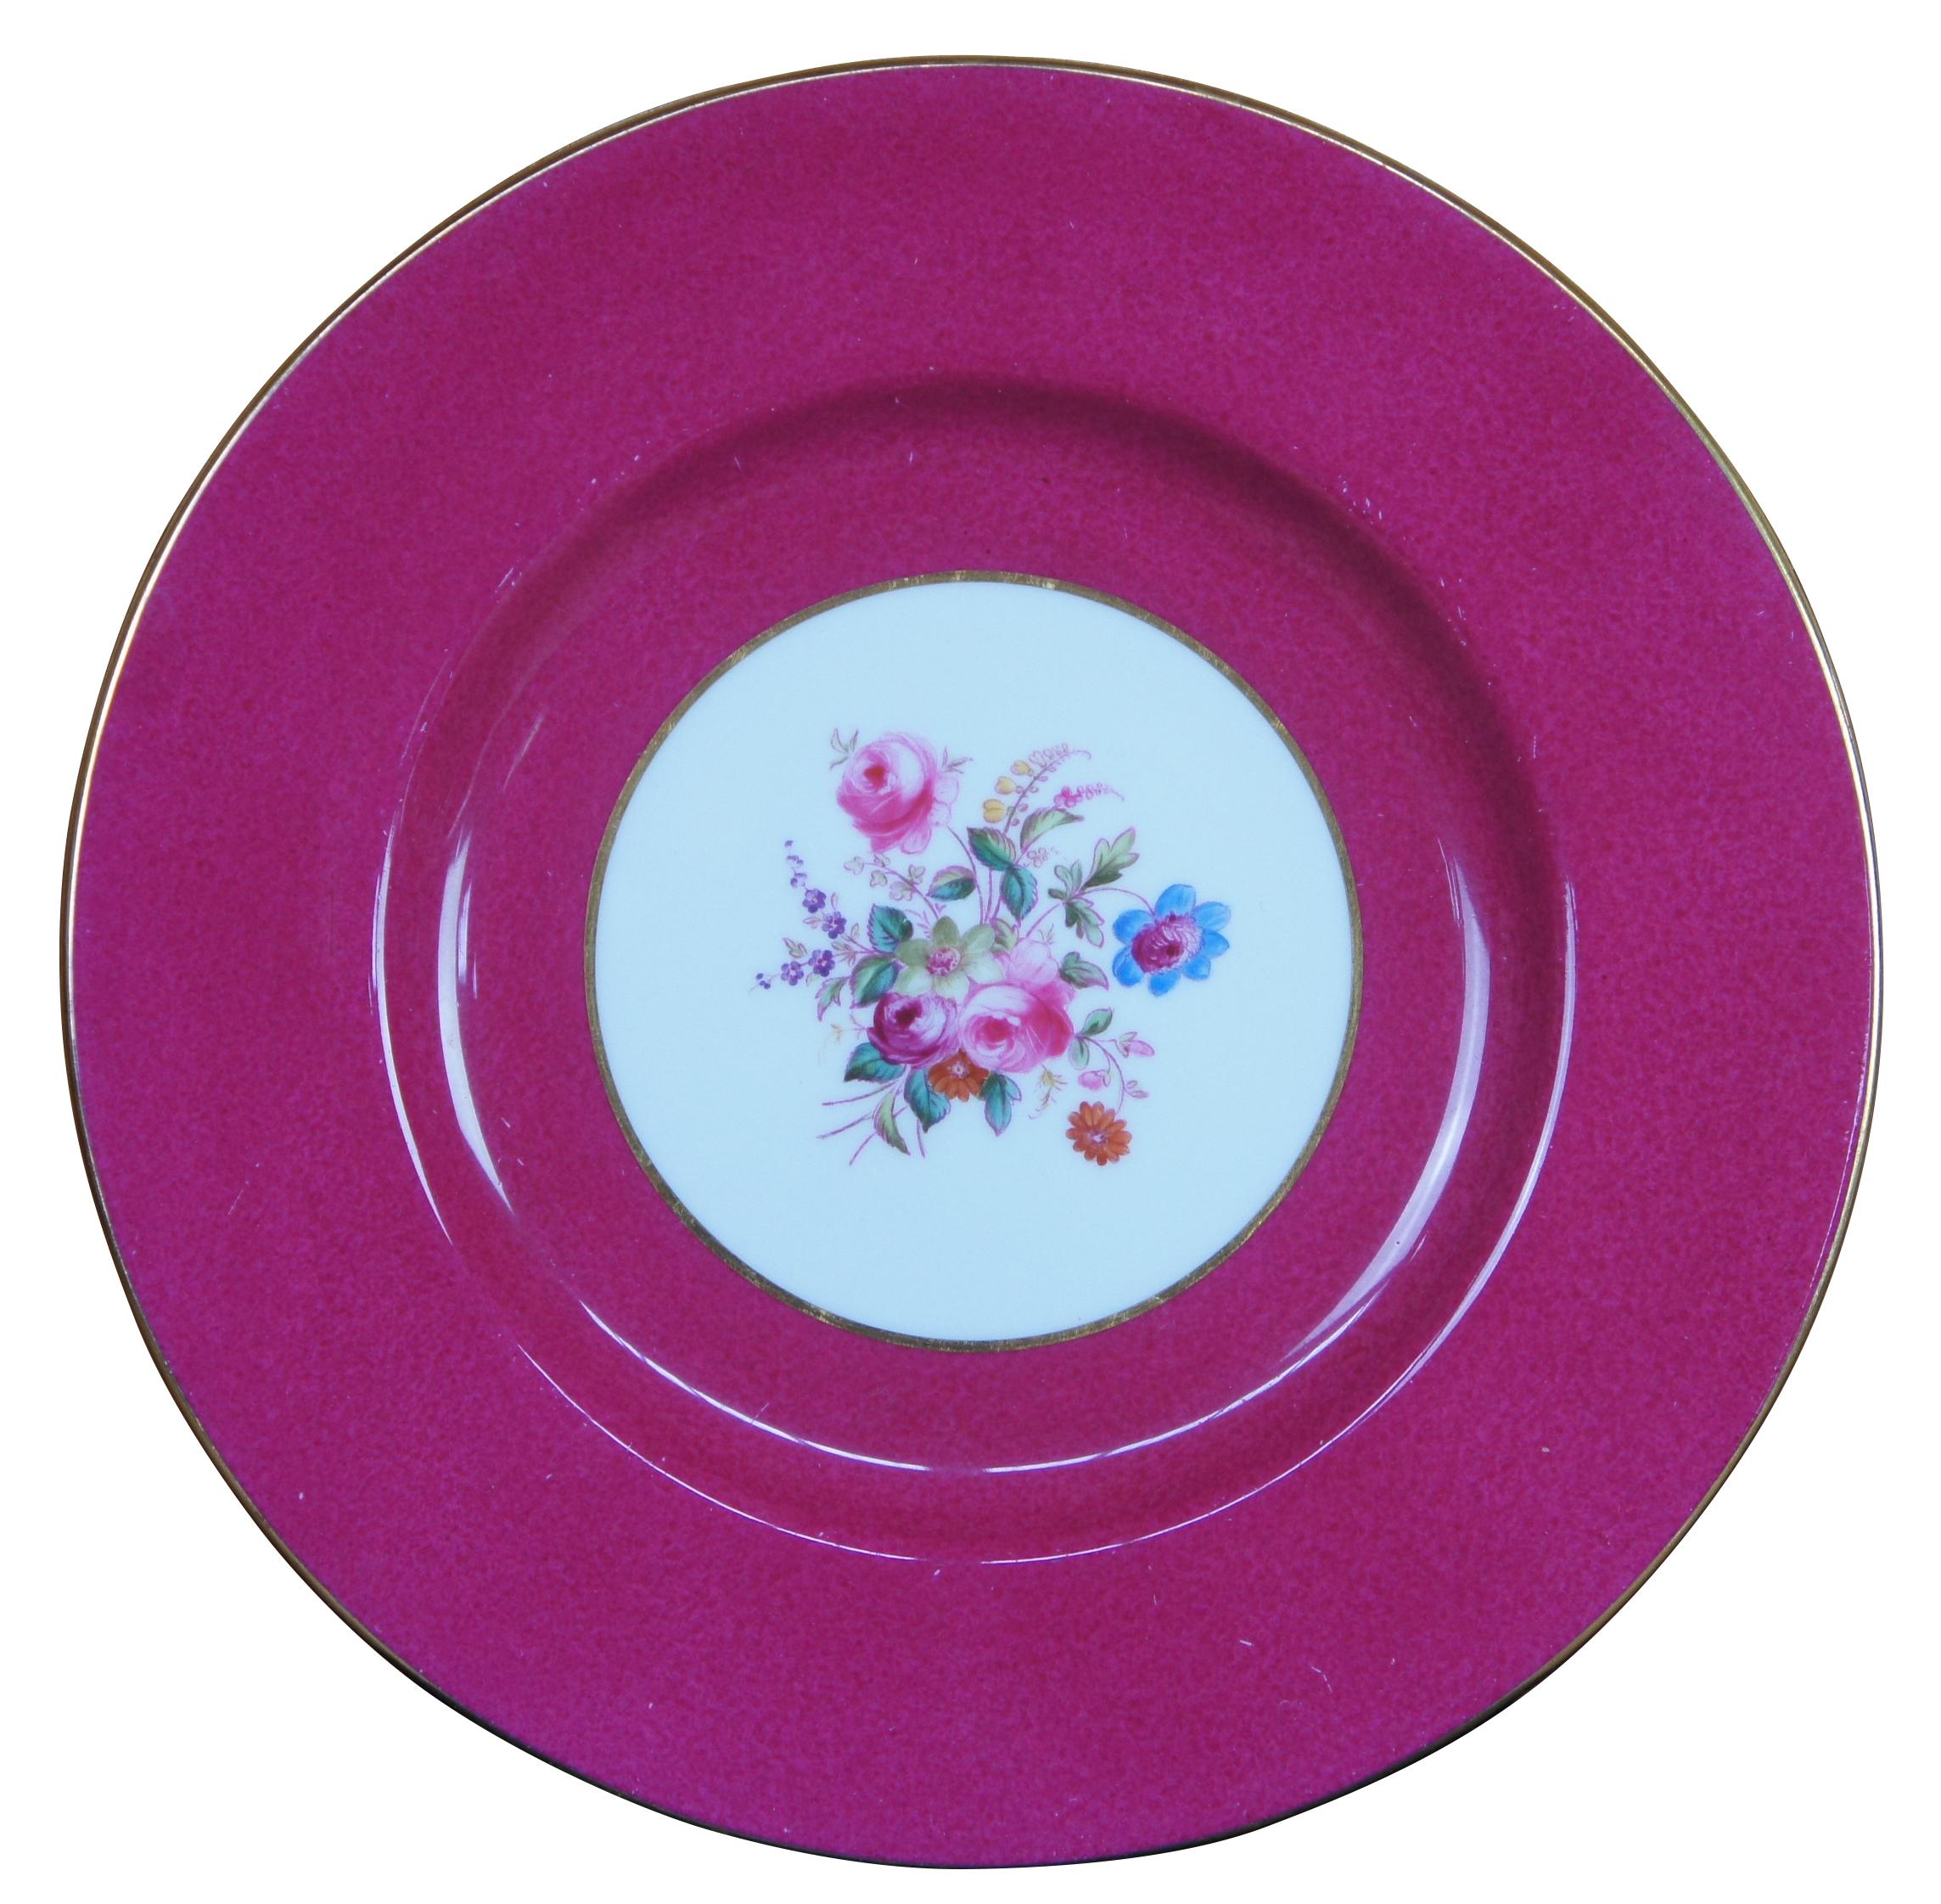 Set of 12 Spode Copeland’s China salad plates in pattern R9282 with a dark magenta pink border around a floral bouquet. Measure: 9